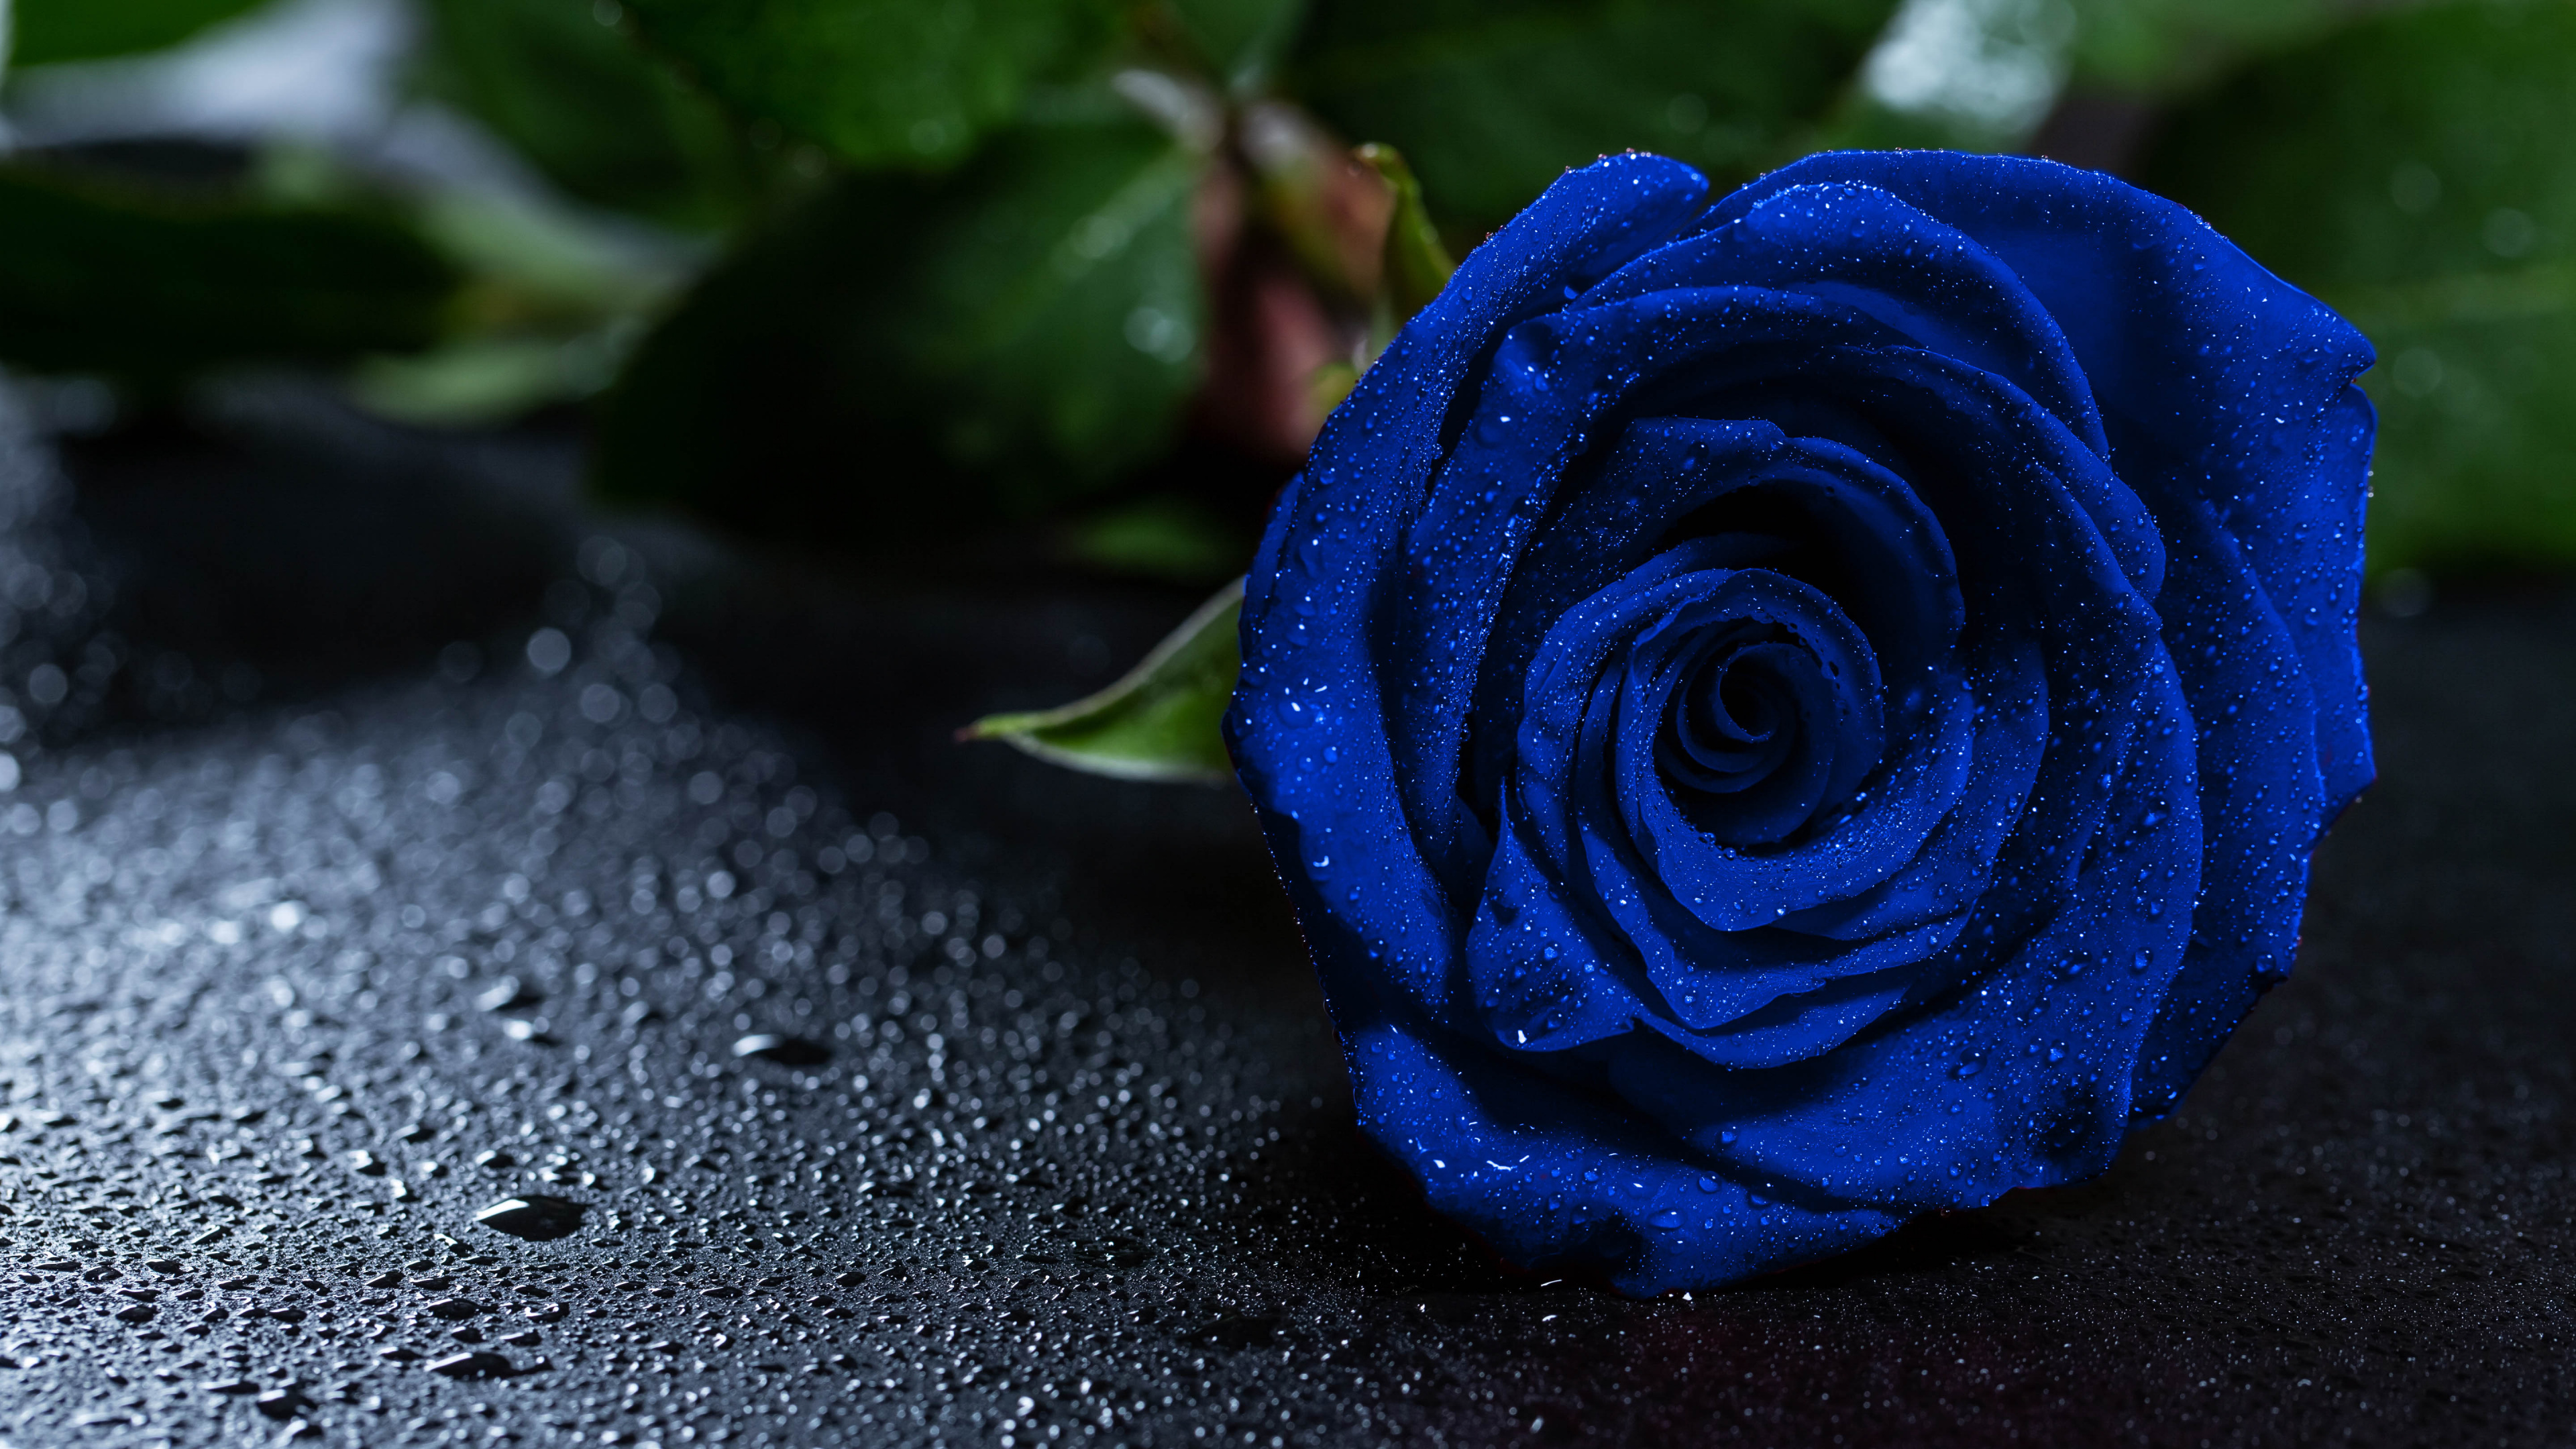 Blue Rose on Black Surface. Wallpaper in 3840x2160 Resolution